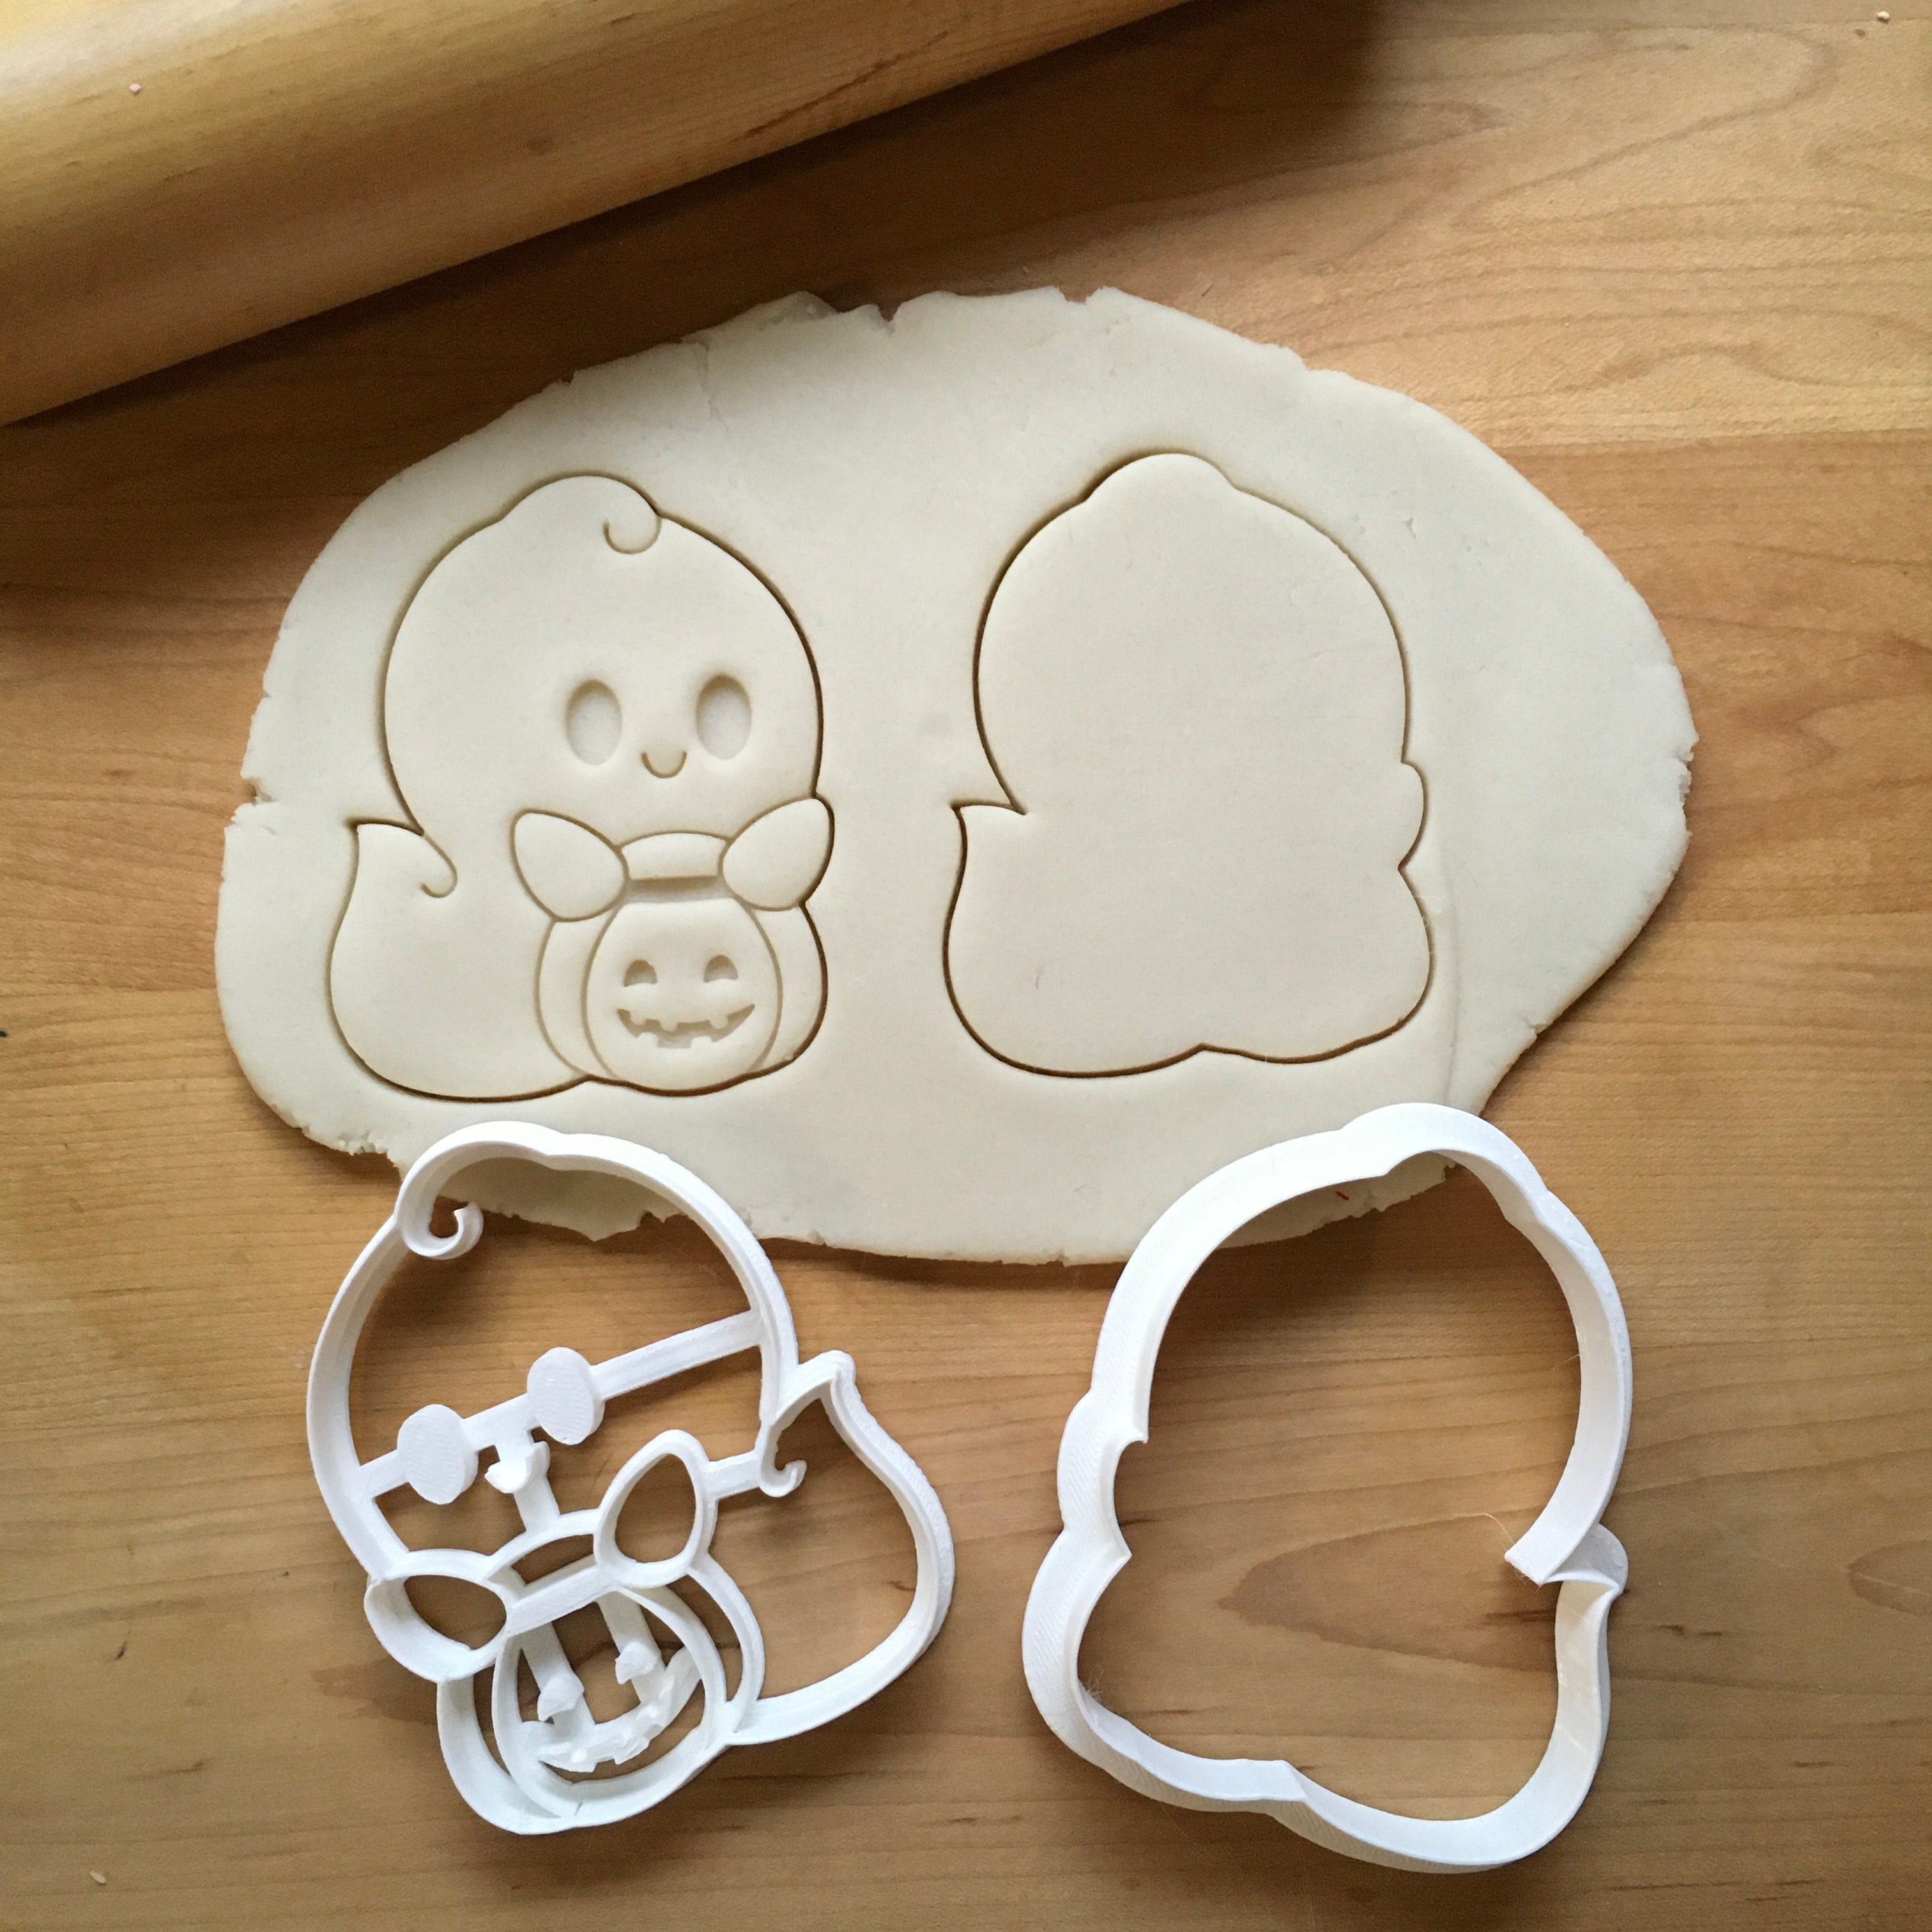 Set of 2 Trick or Treat Ghost Cookie Cutters/Dishwasher Safe